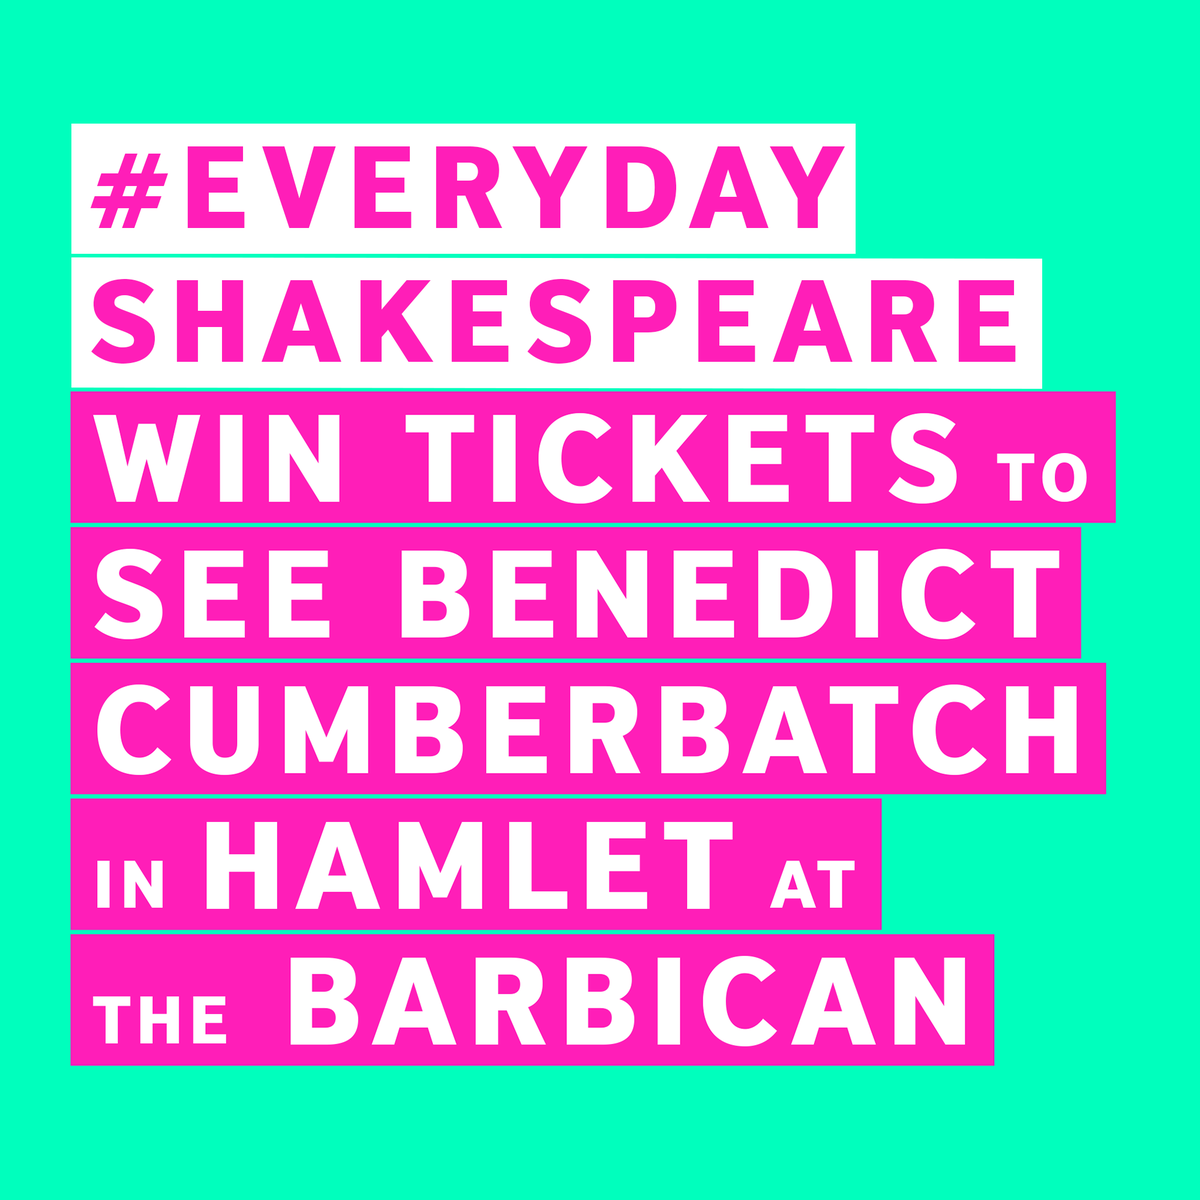 Instagrammers! Remember to enter our #EverydayShakespeare competition before Friday! ow.ly/ThZlE